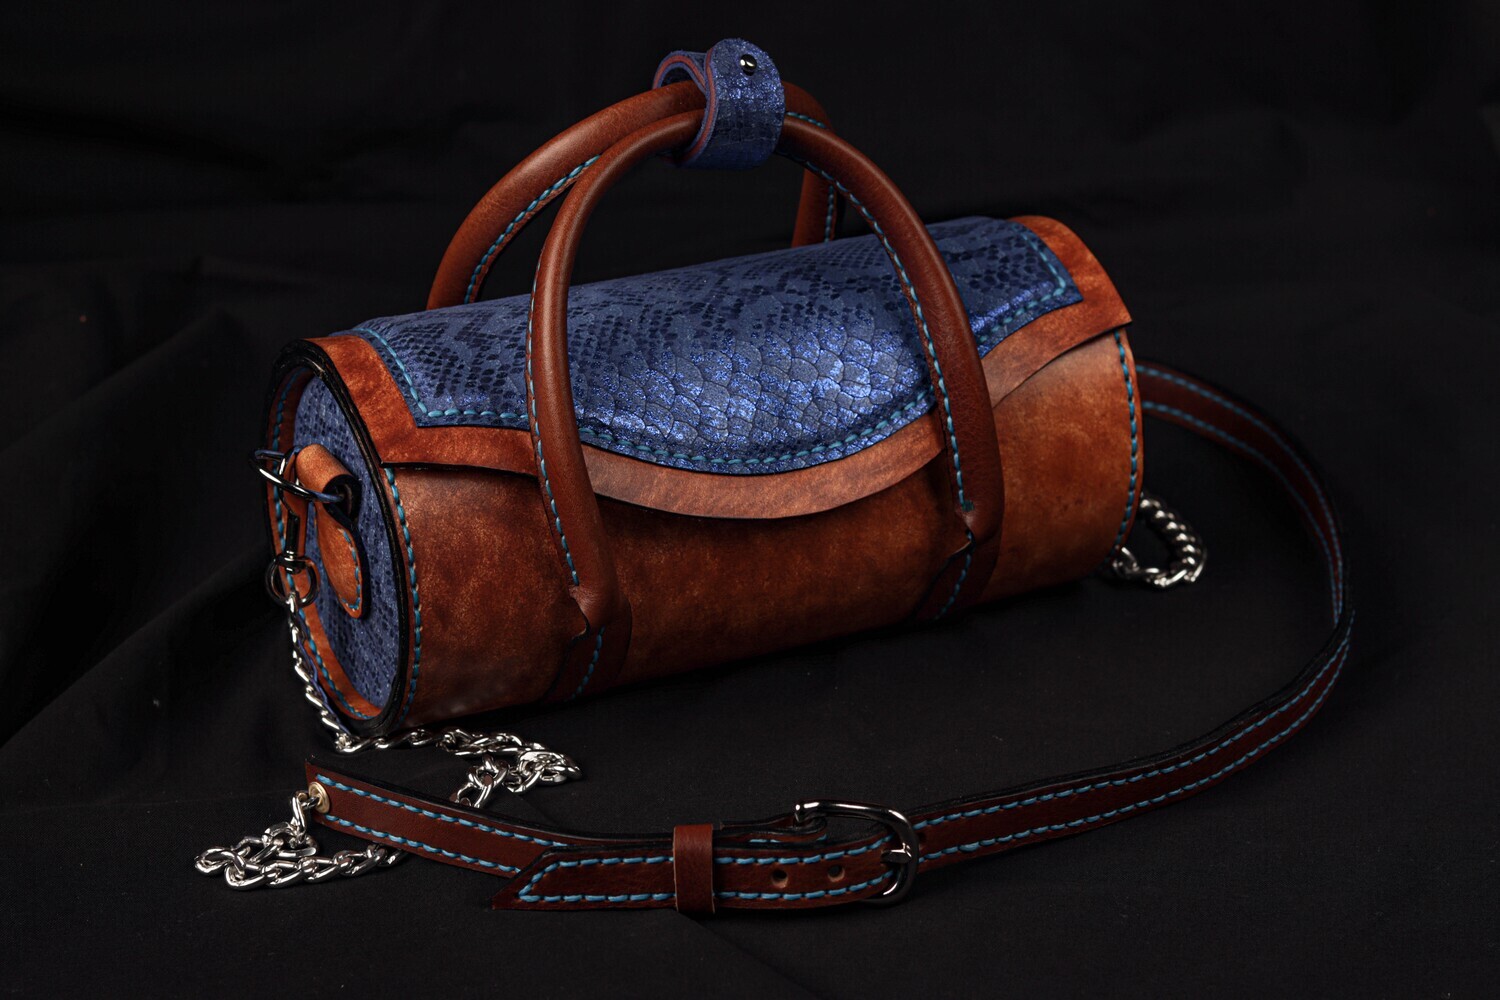 Round leather bag